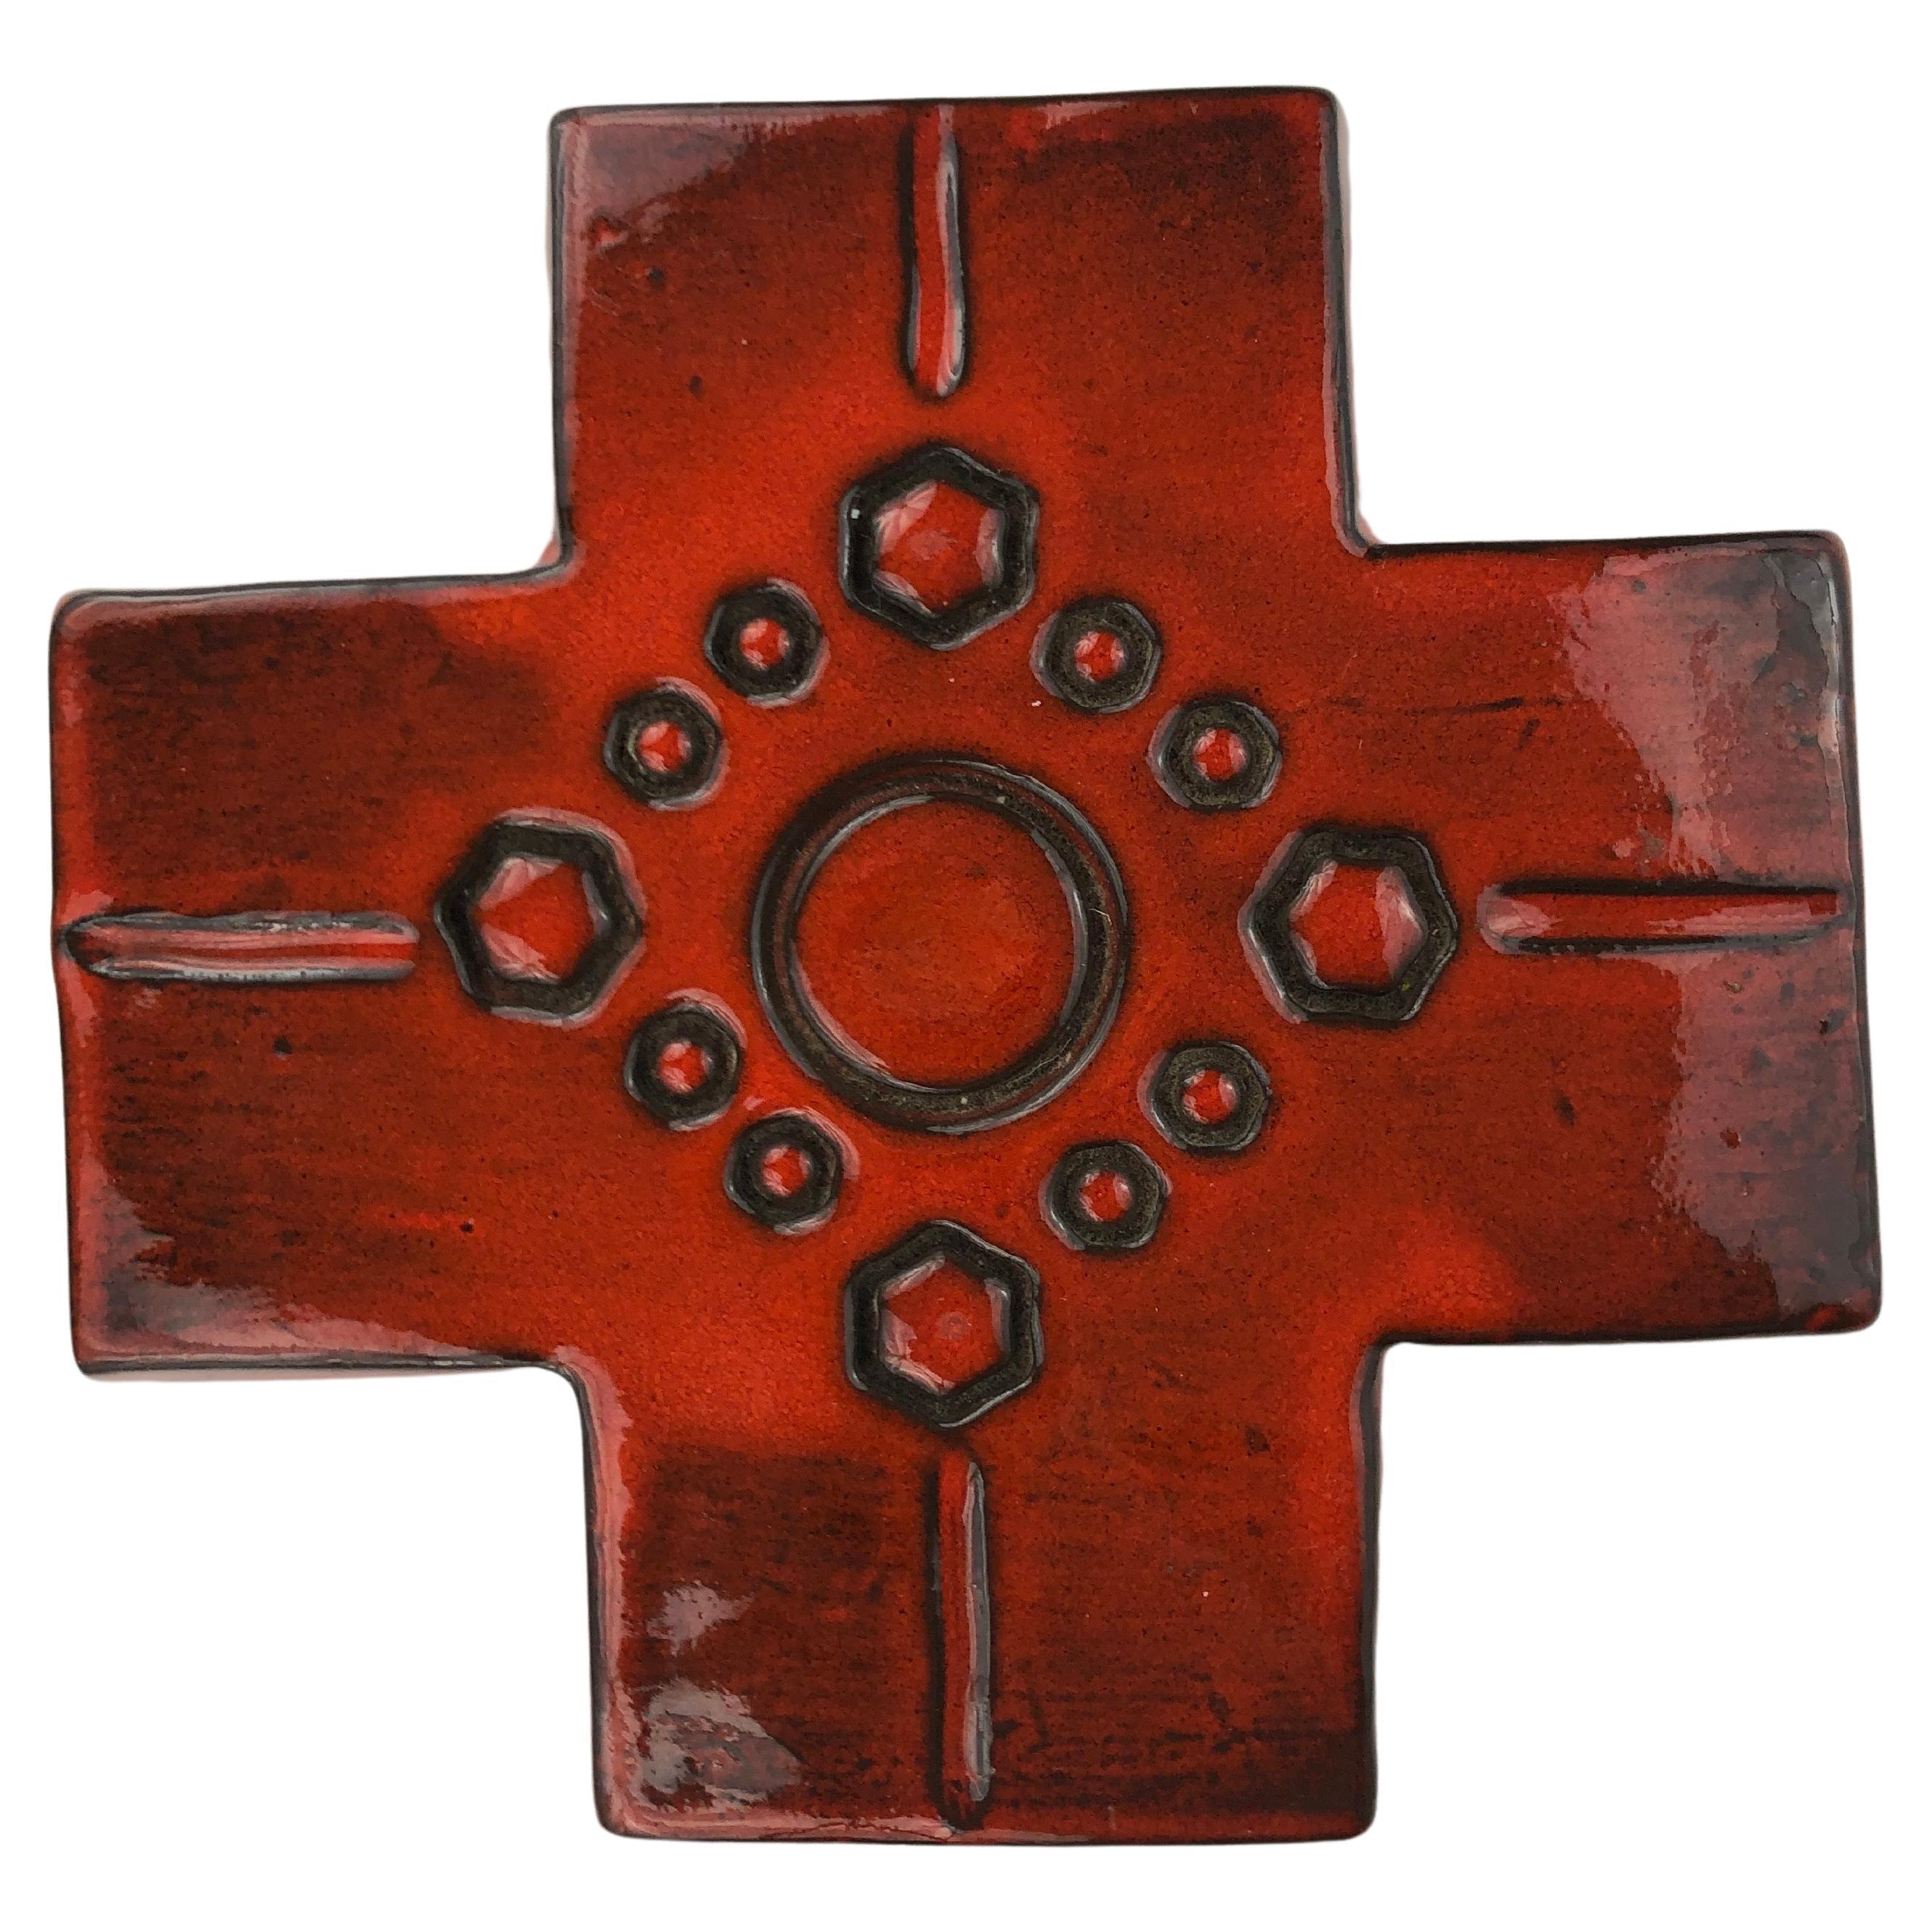 A red-orange, glossy ceramic, midcentury European cross. 

Our large collection of European ceramic crosses consist of an array of handcrafted crosses, each demonstrating the skilled craftsmanship of our dedicated artisans. This vibrant red-orange